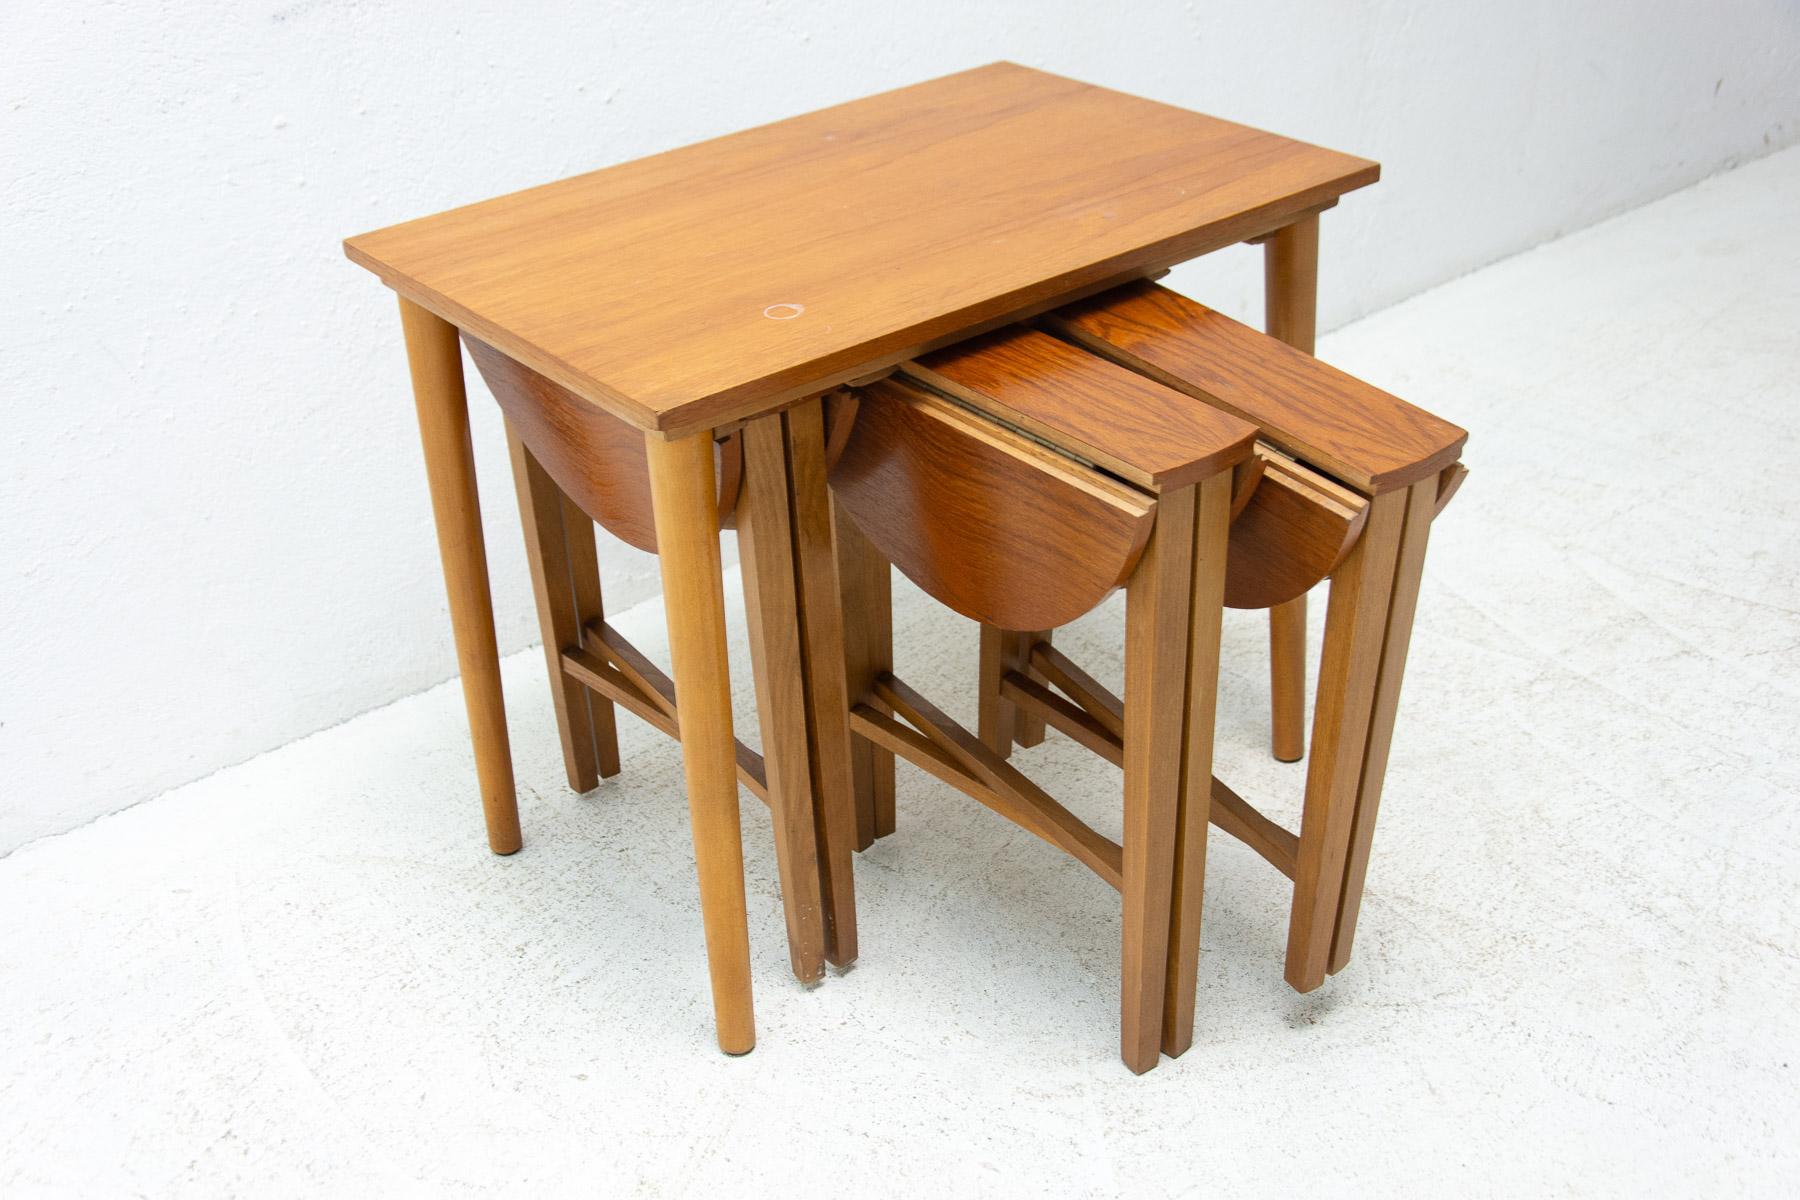 Set of Four Nesting Tables, Designed by Poul Hundevad, 1960's For Sale 3